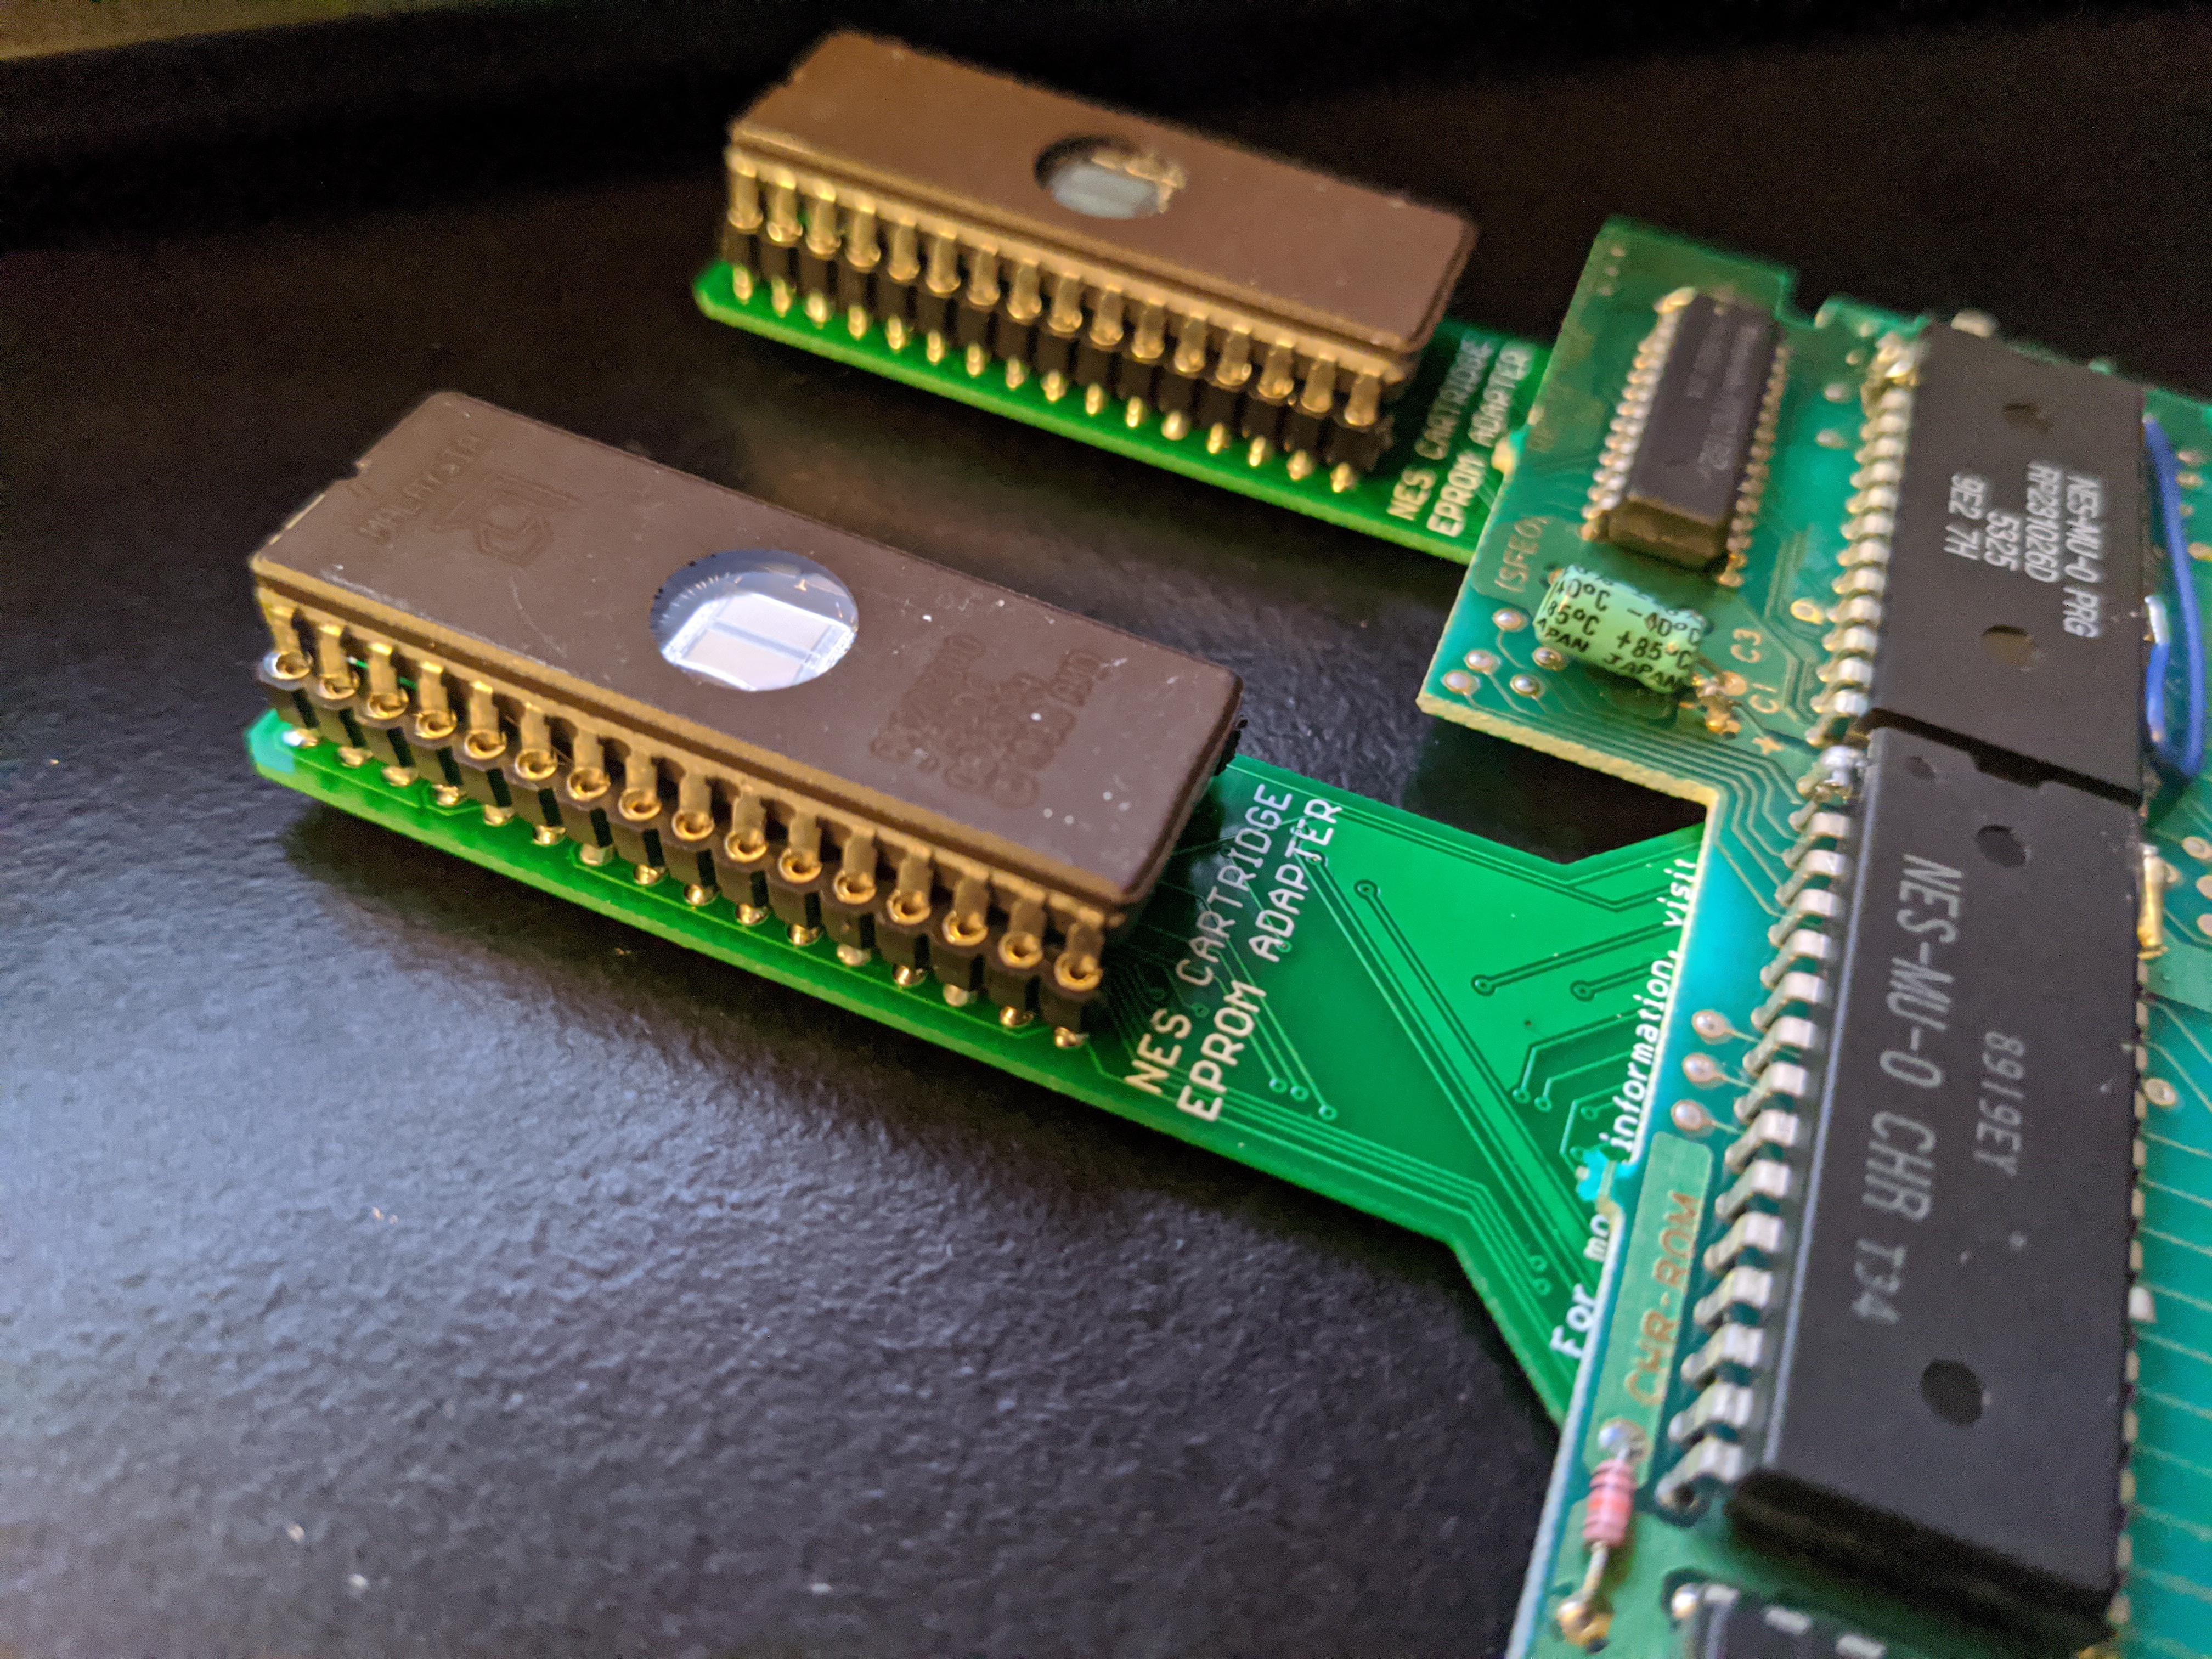 nes on a chip